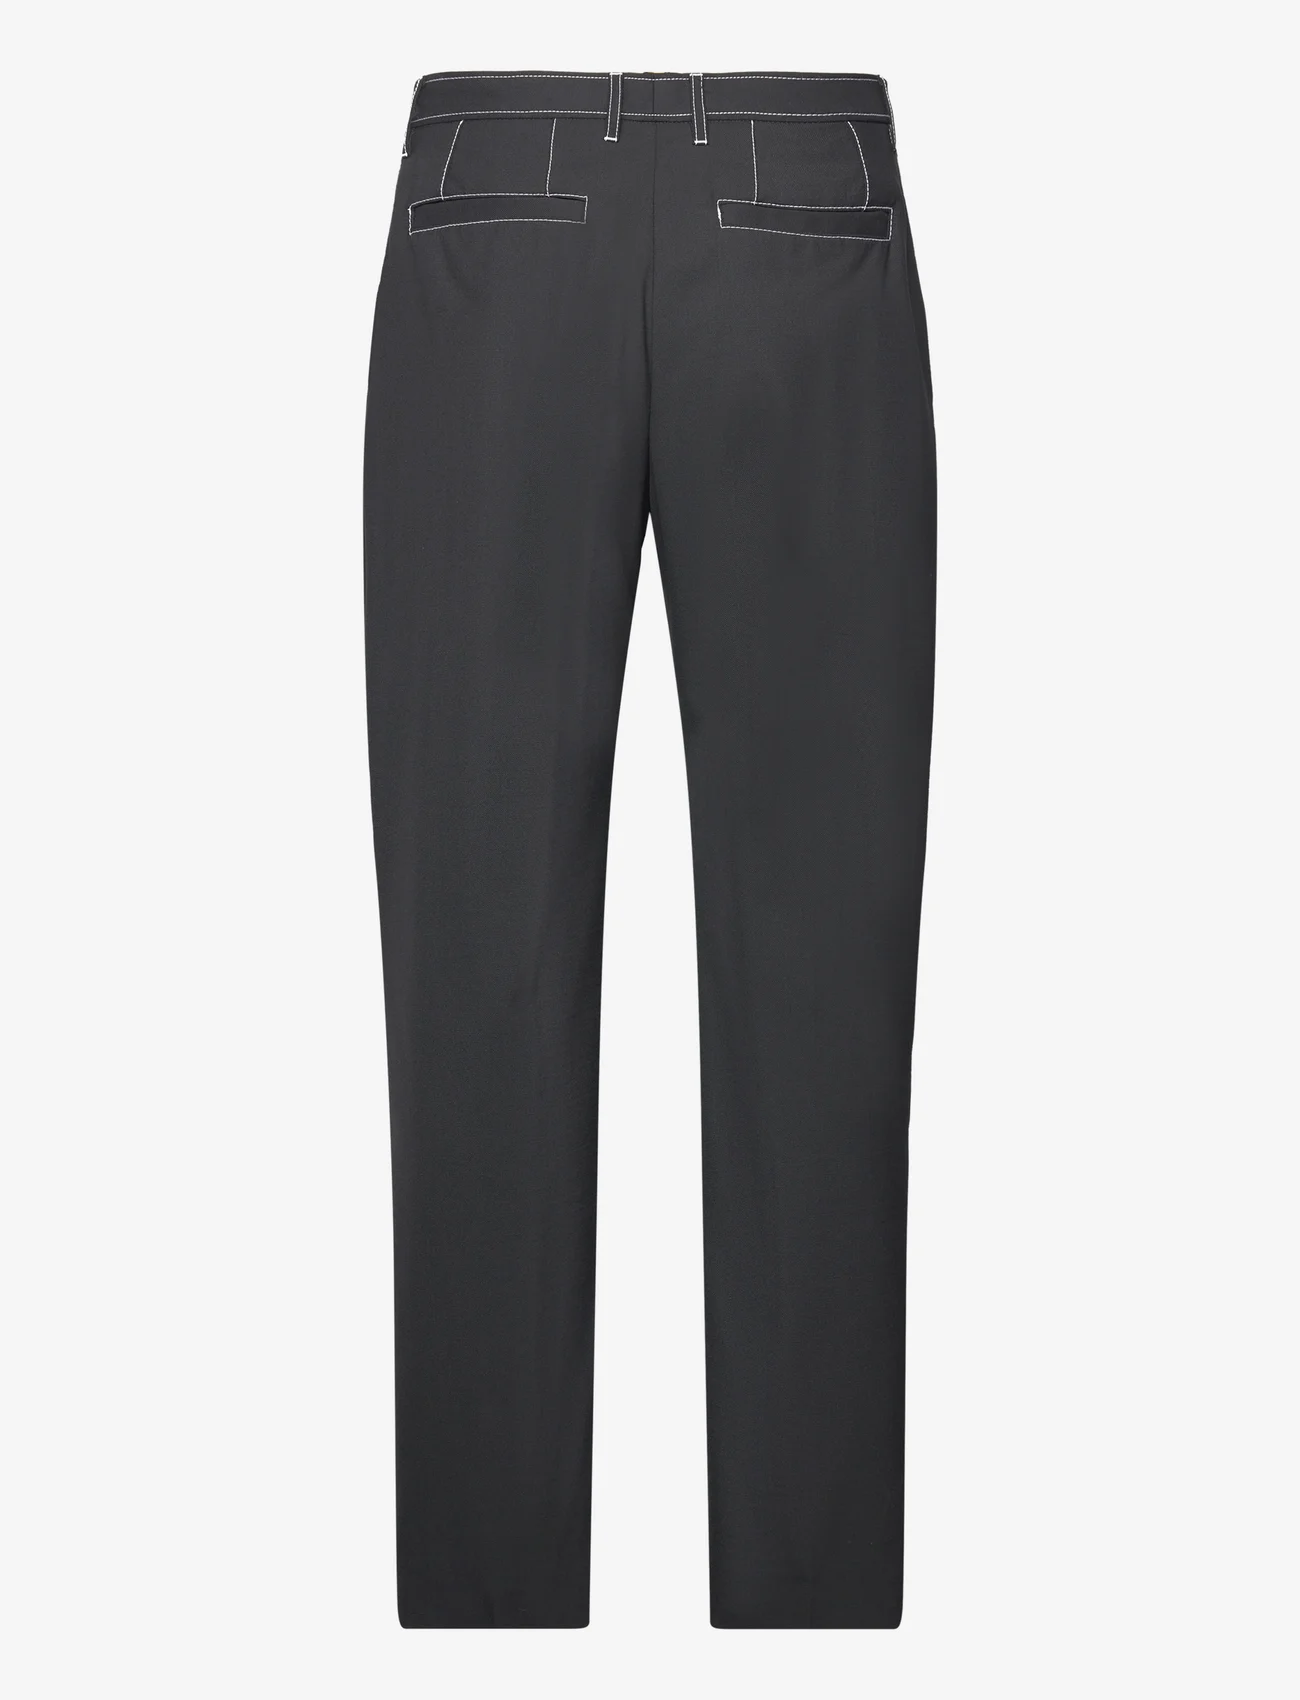 Wood Wood - Nathaniel Trousers - chinos - black - 1